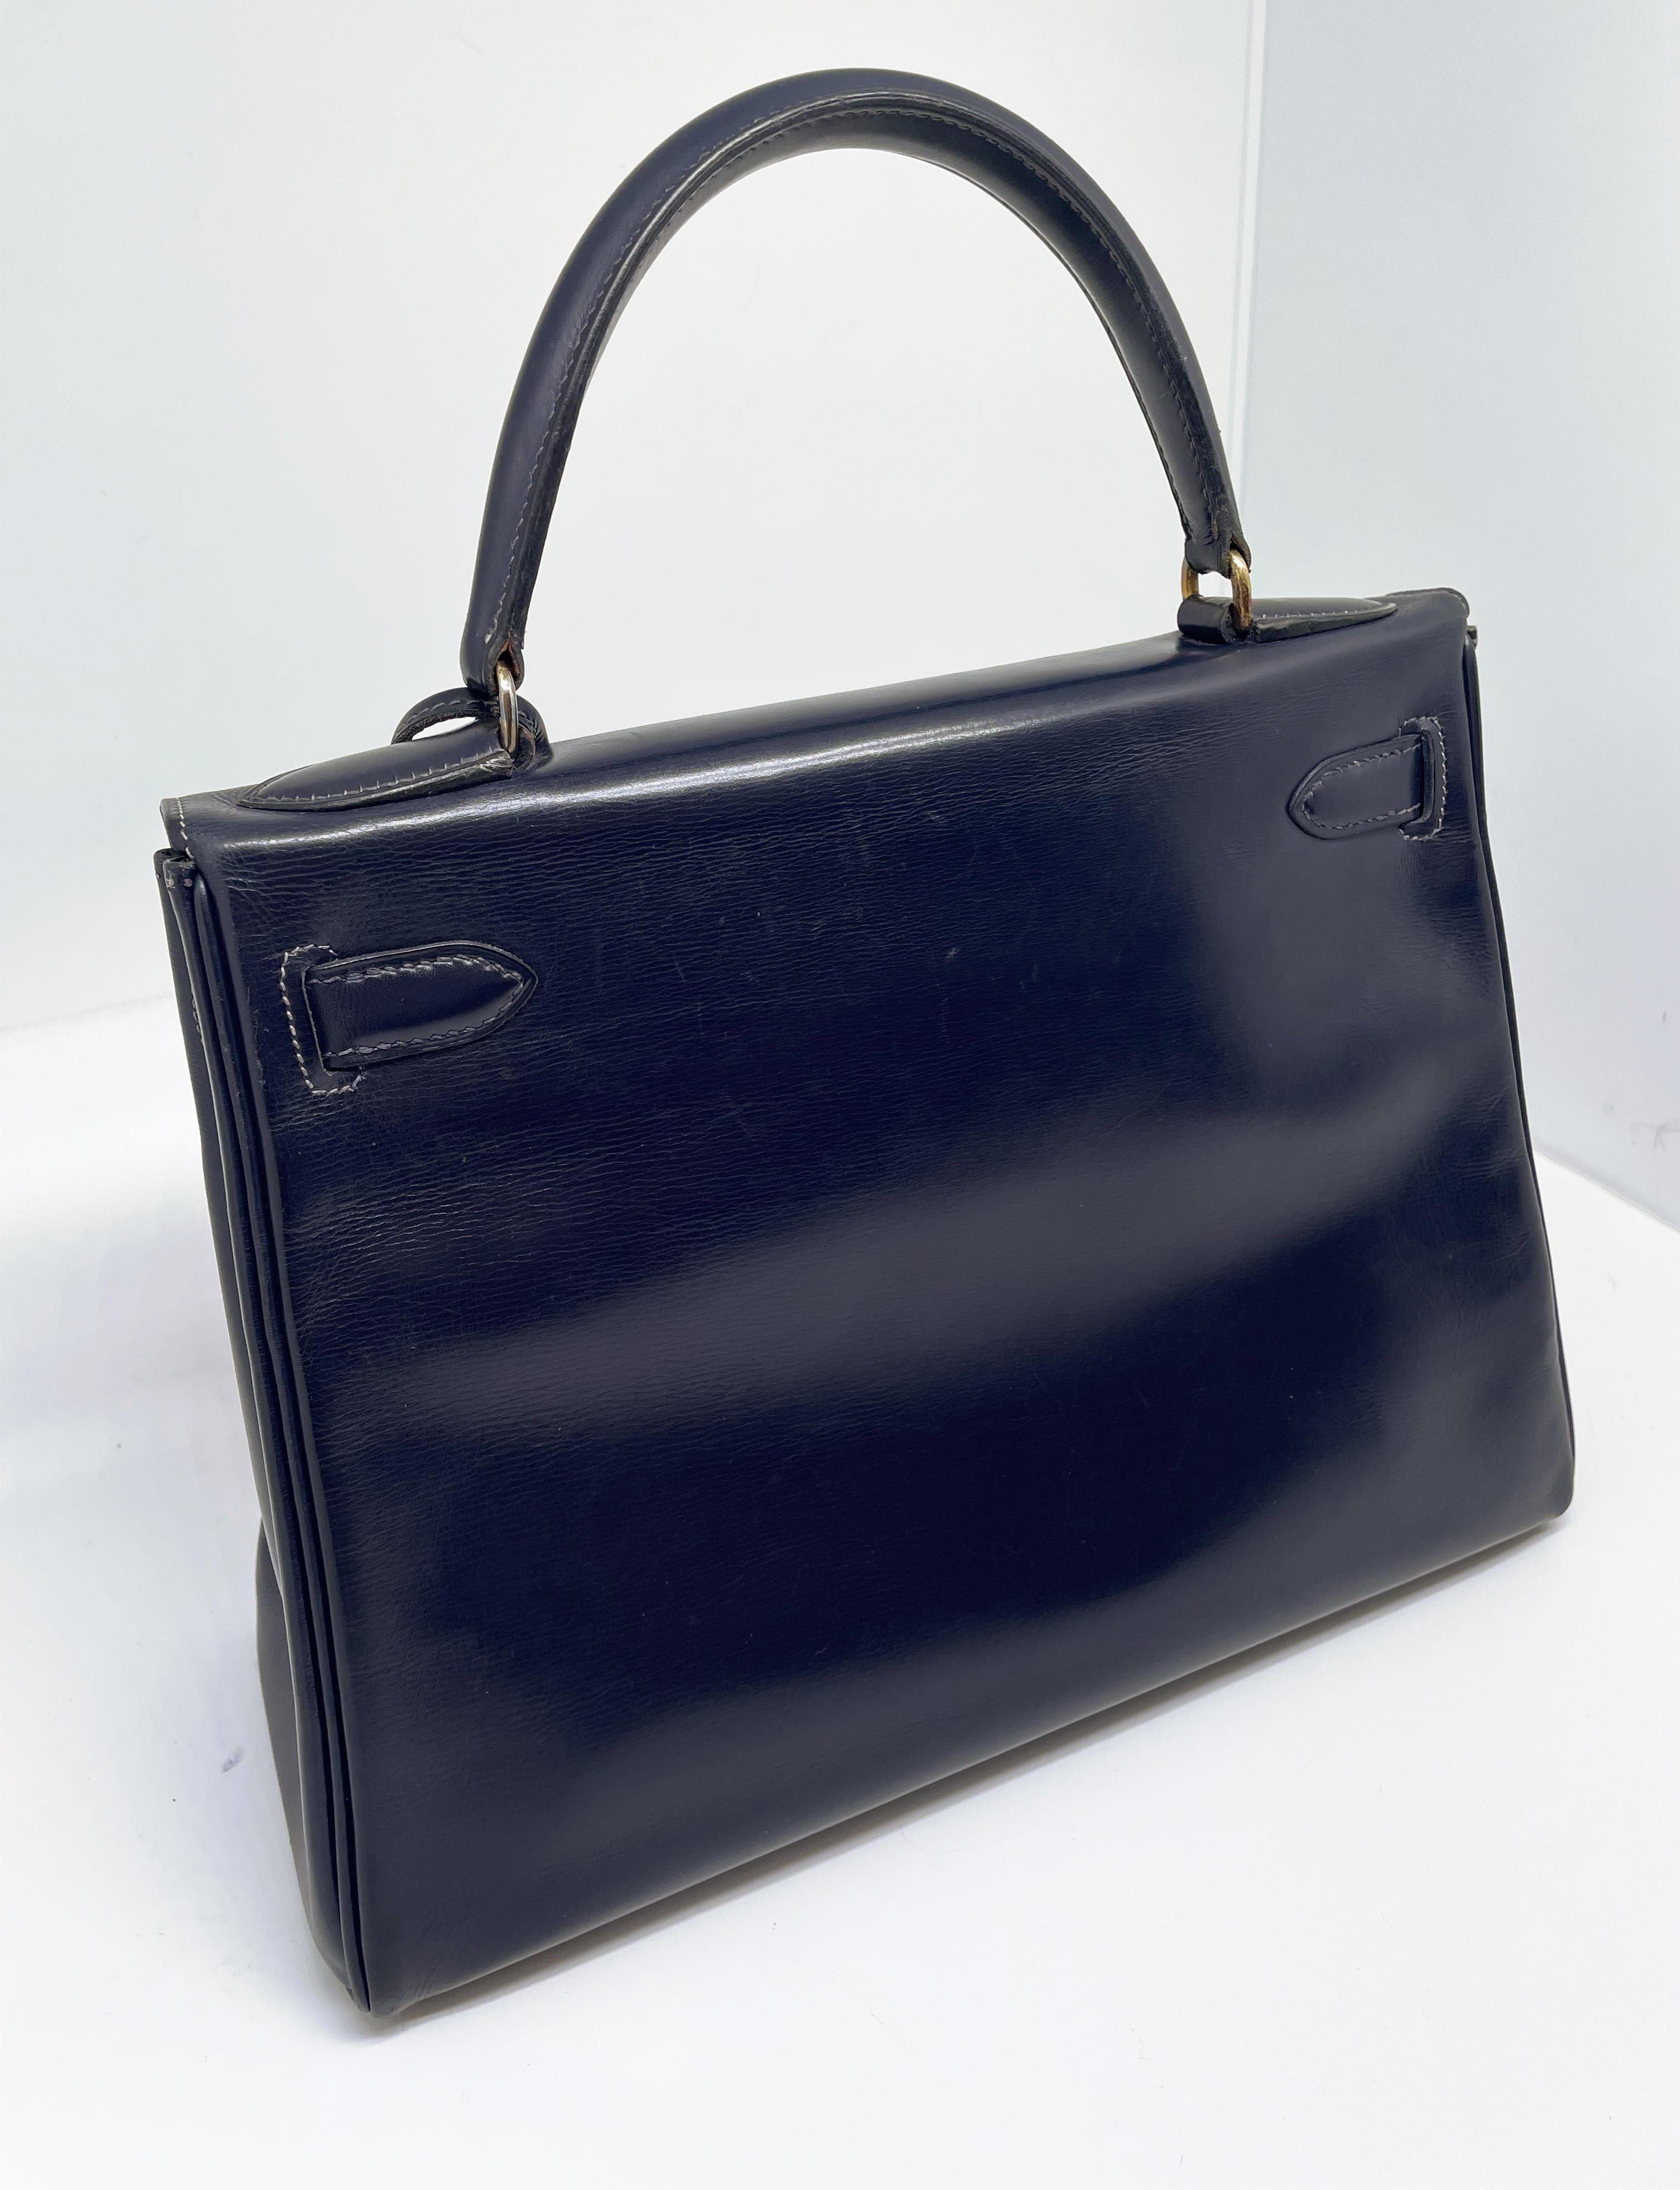 Exceptional Hermès Kelly bag 28 returned in navy box leather 5